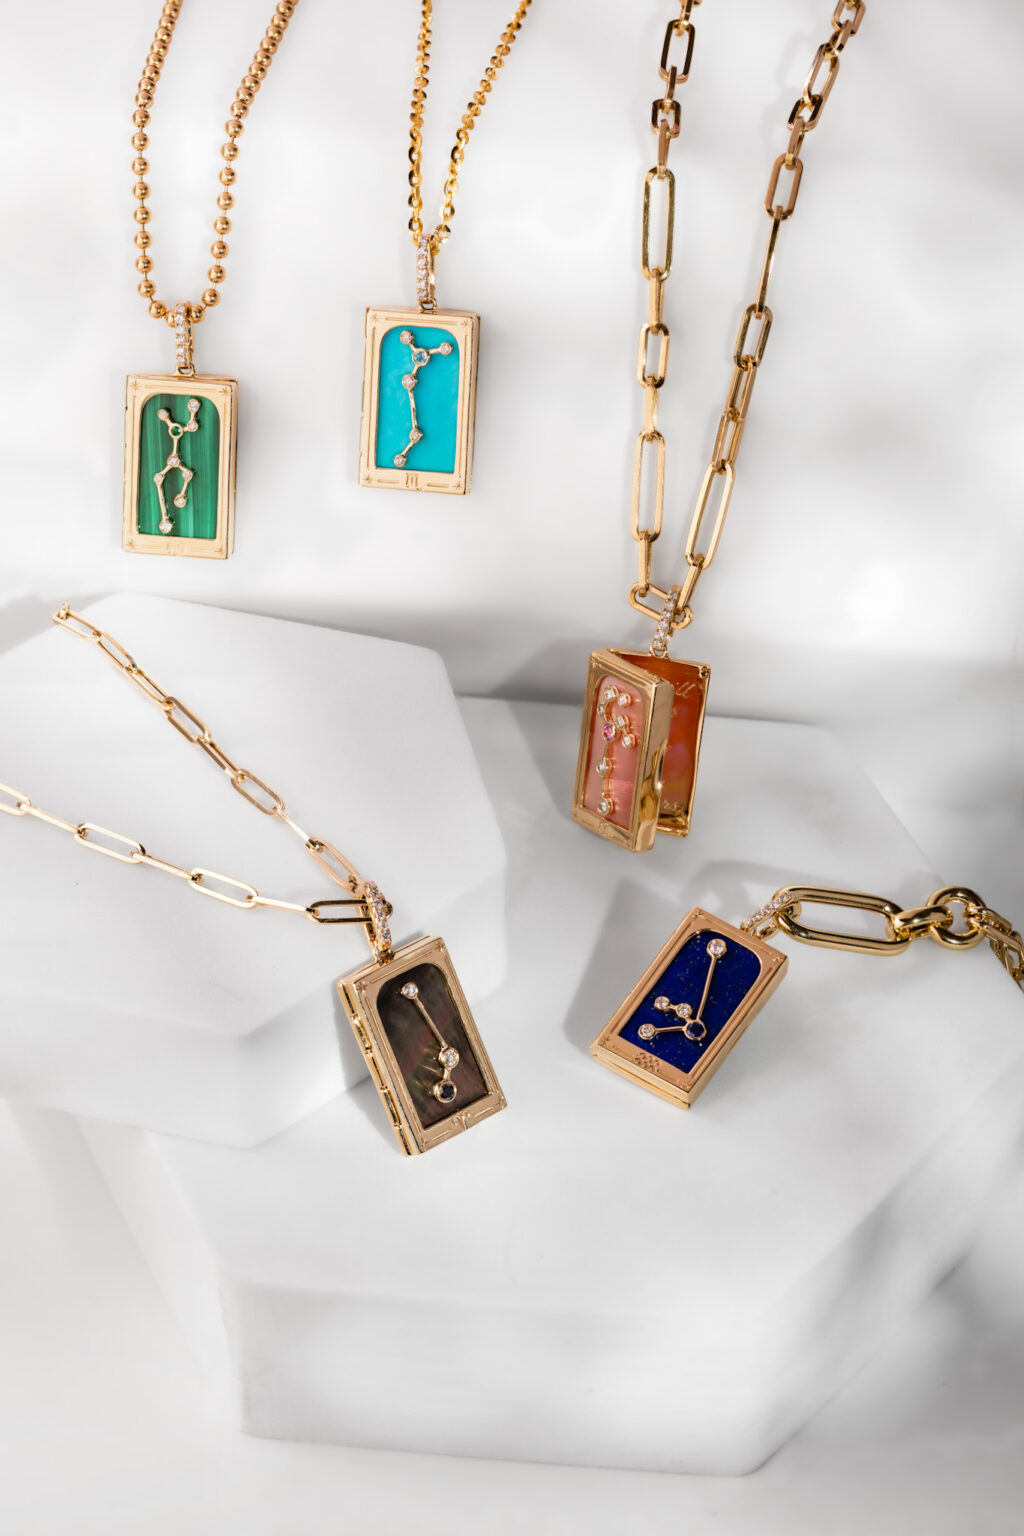 5 Filipino Jewelry Designers To Add to Your Collection | Lifestyle.INQ